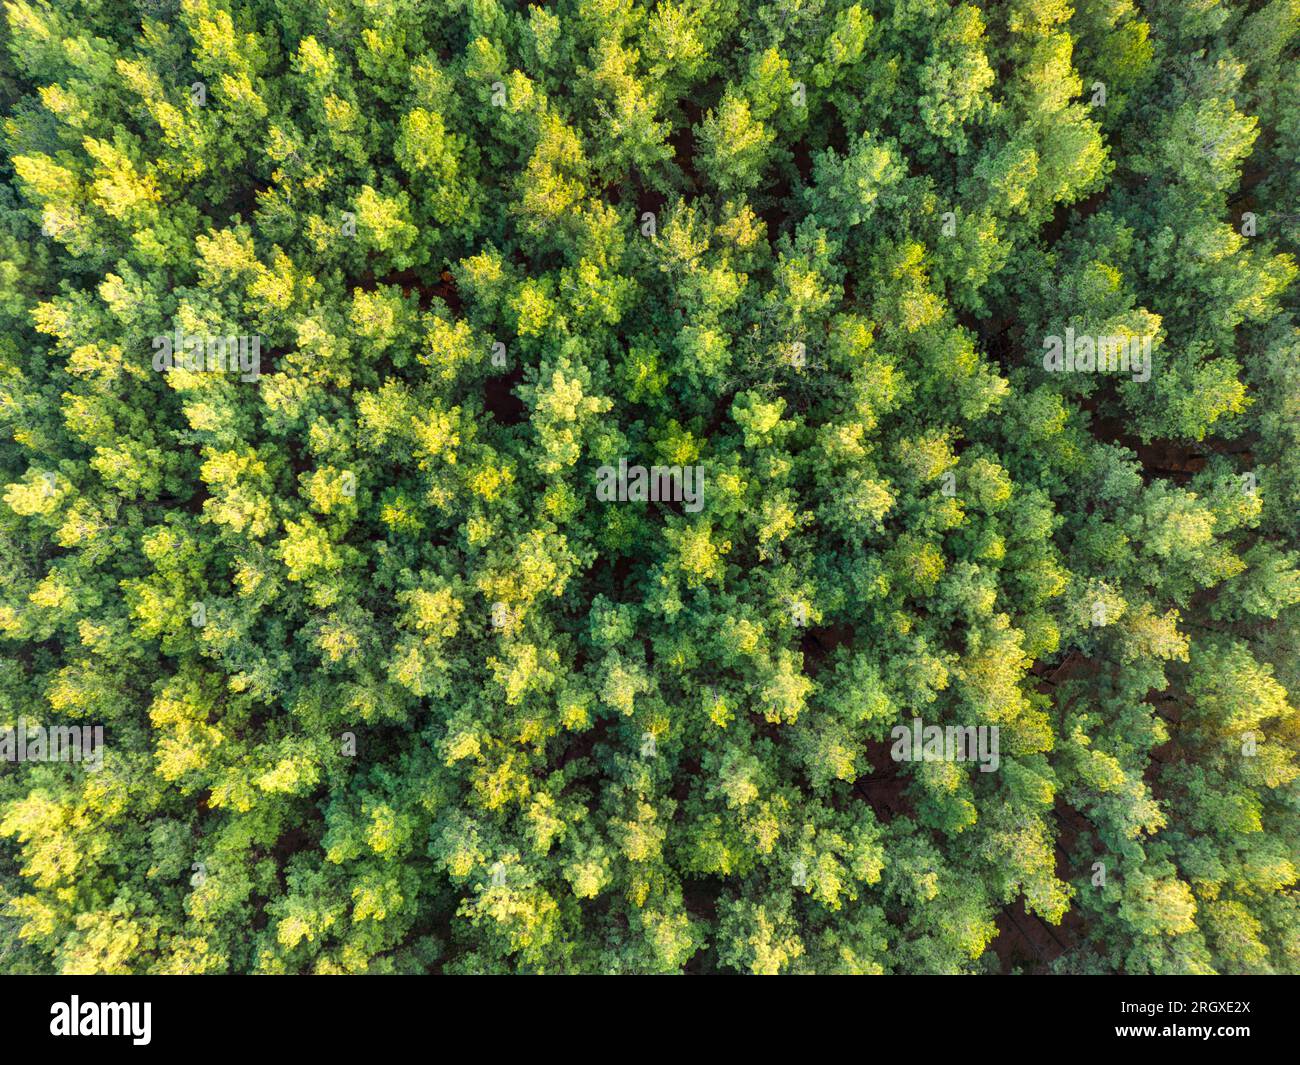 Aerial view of green and lush tree tops building a thick forest in the Province Misiones in Argentina, South America Stock Photo